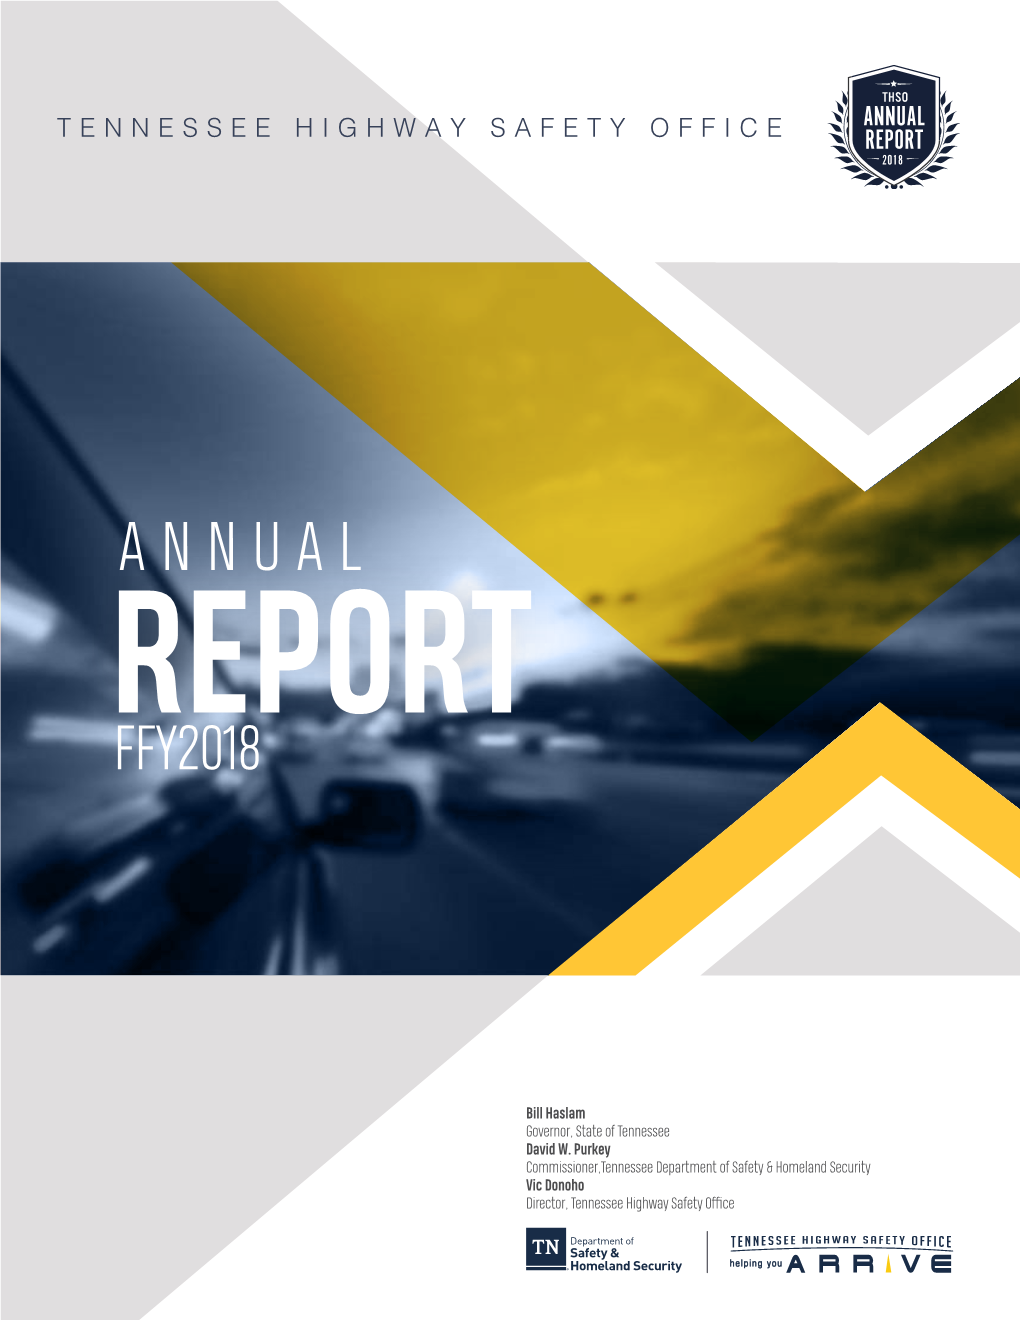 Annual Report Abbreviations Explained 2018